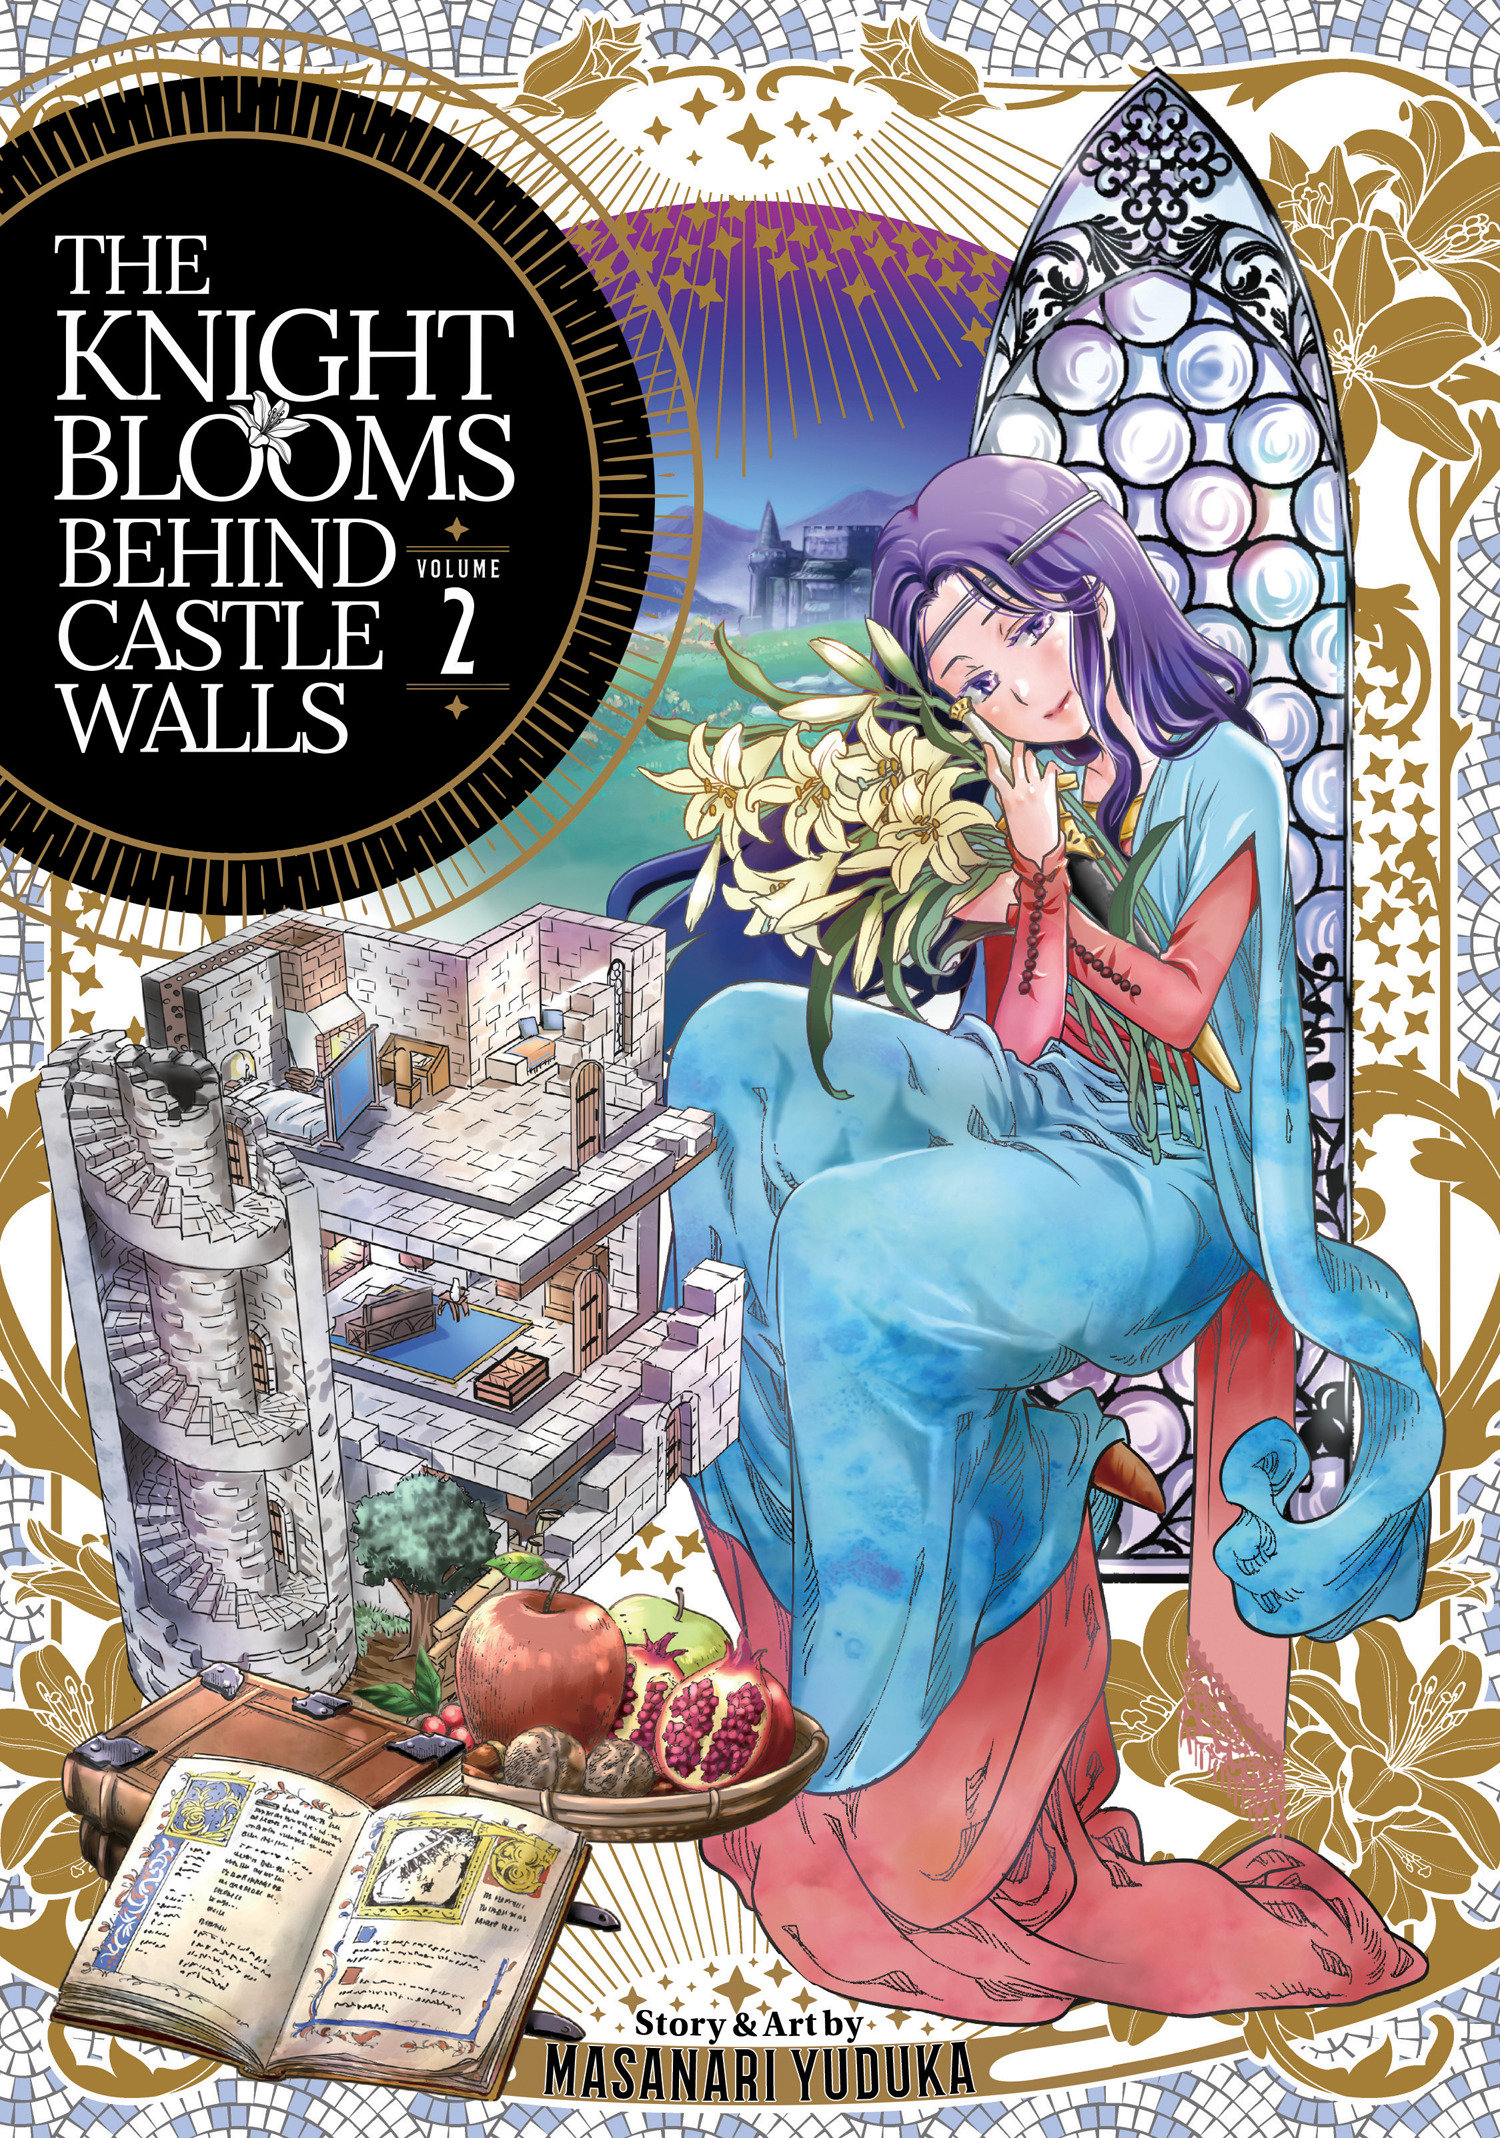 The Knight Blooms Behind Castle Walls Volume 2